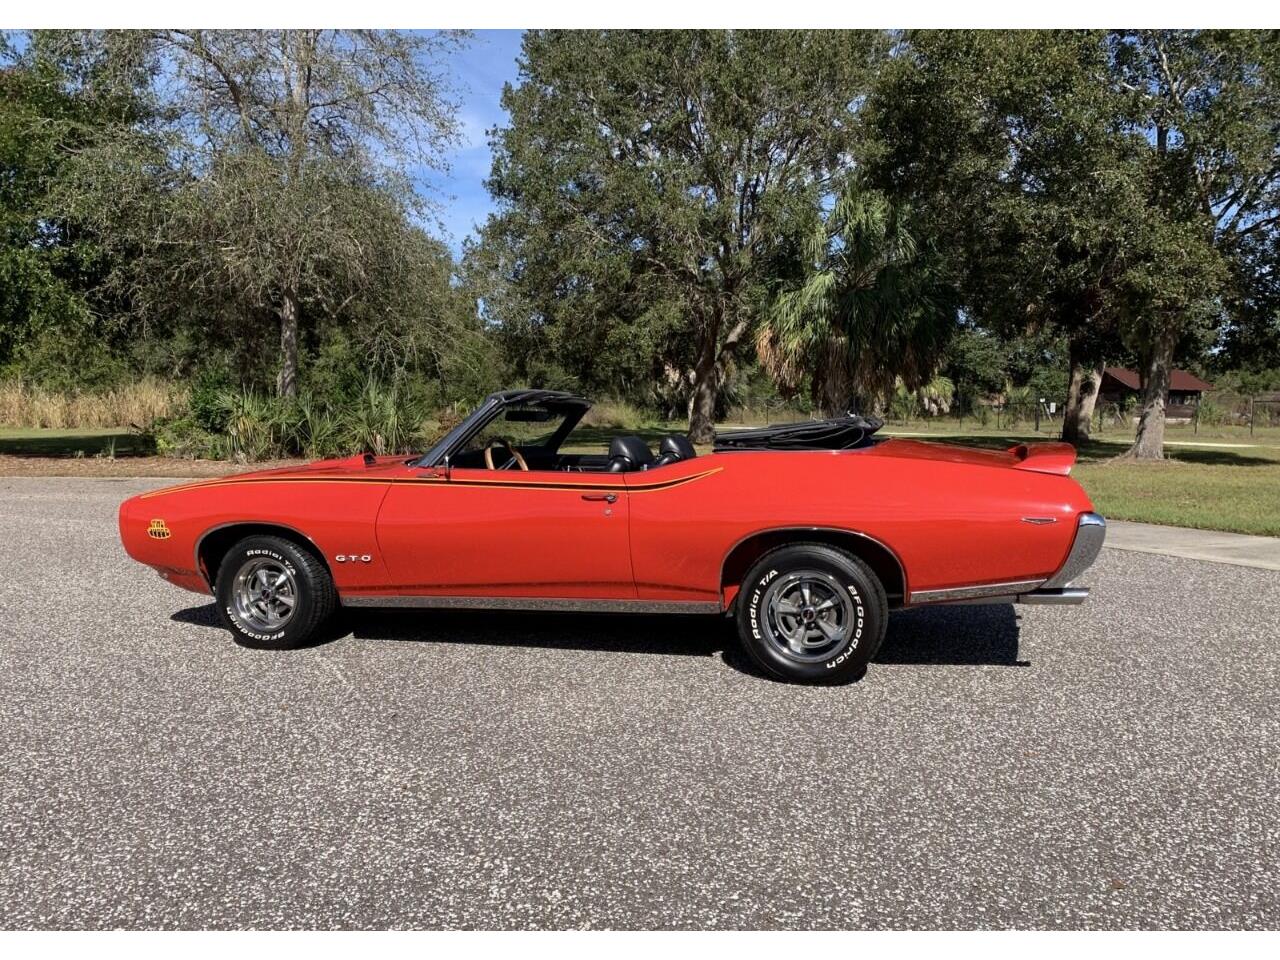 For Sale: 1969 Pontiac GTO in Clearwater, Florida for sale in Clearwater, FL